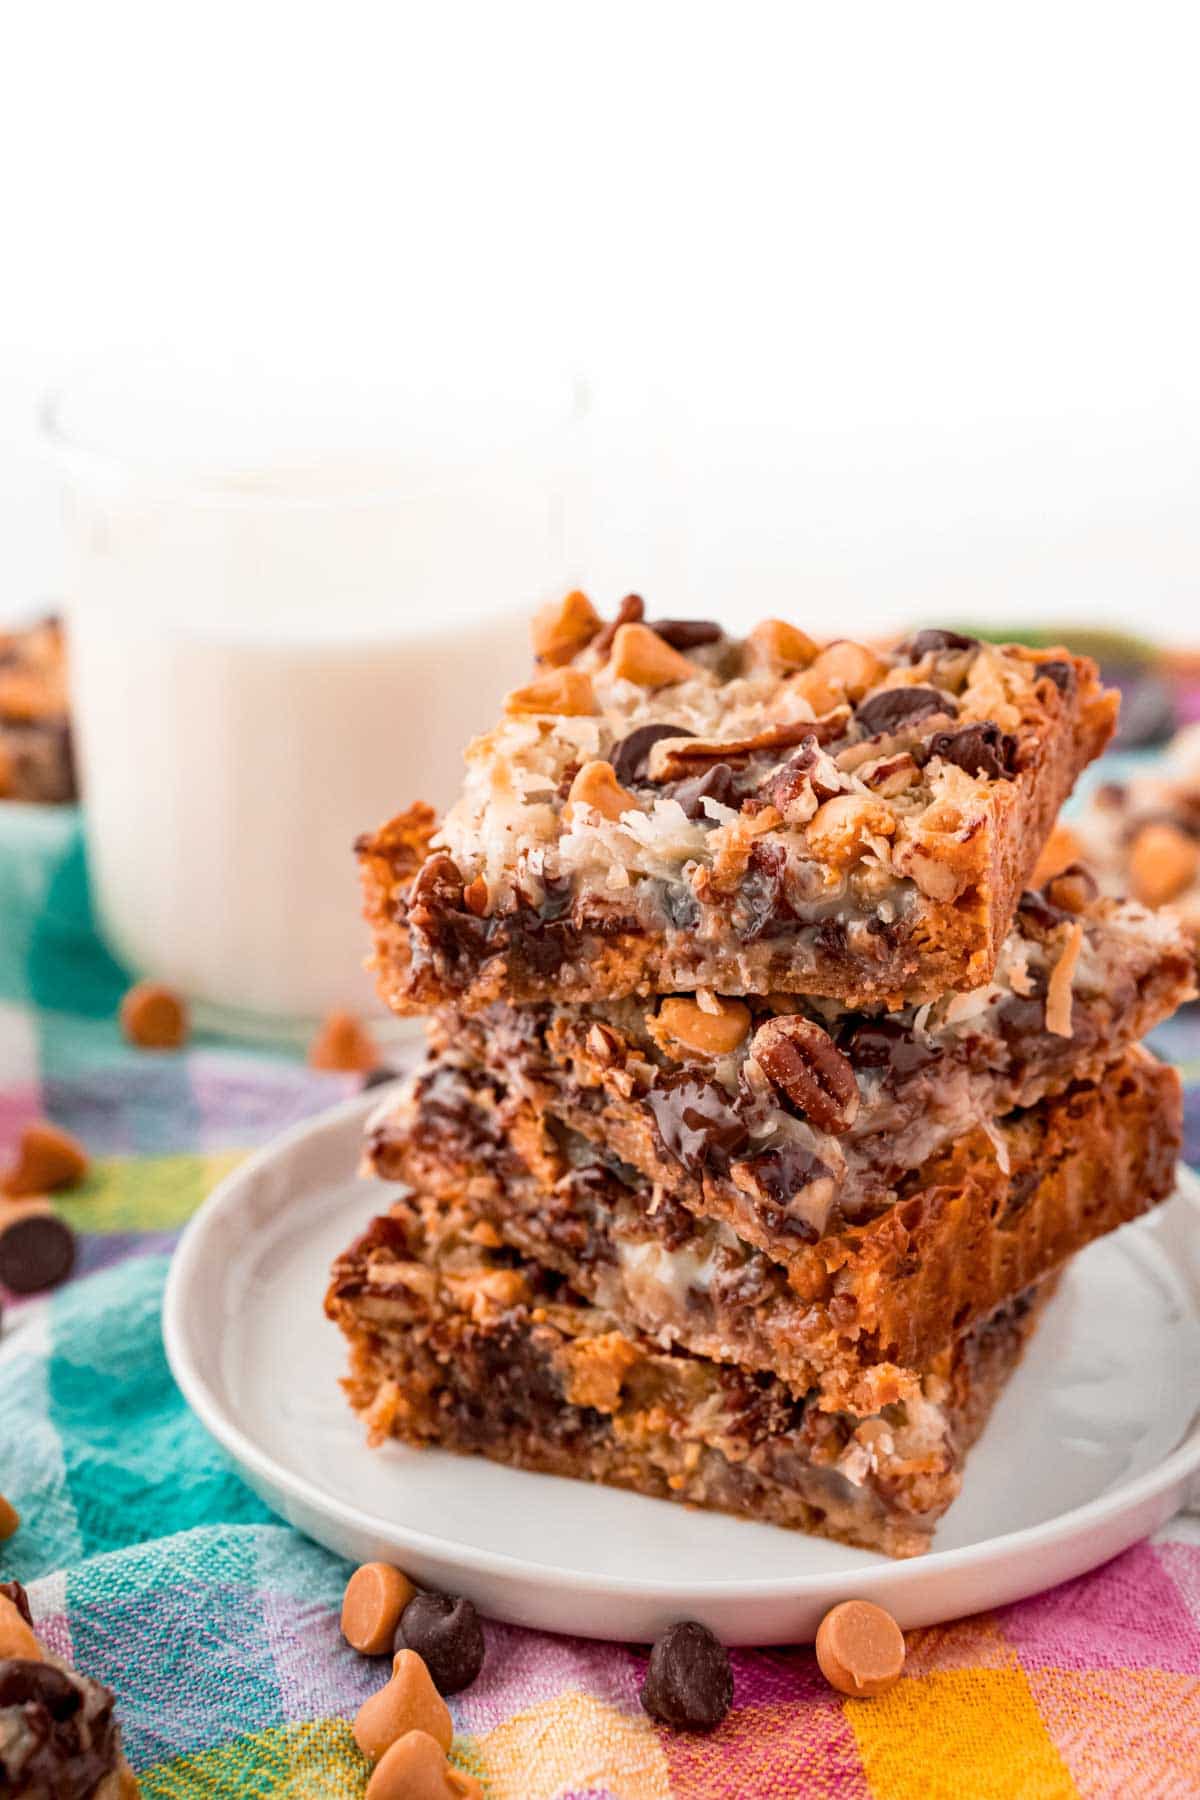 The Best Old Fashioned 7 Layer Bars Recipe - Play Party Plan